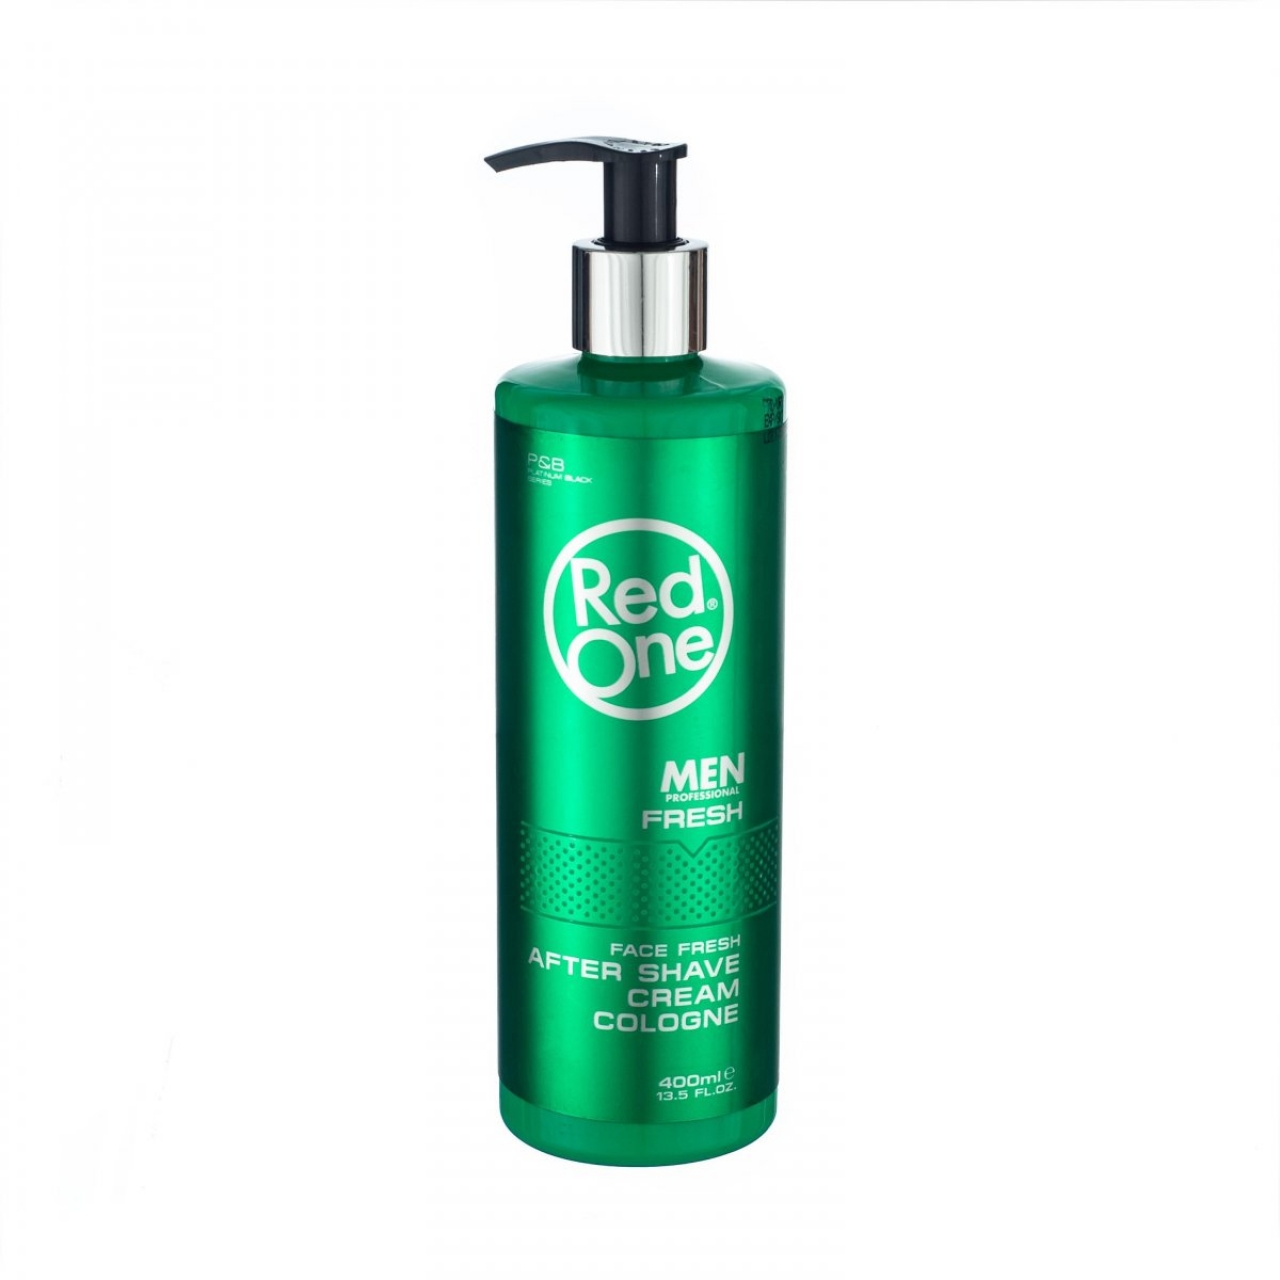 Redone Fresh After Shave Cream Cologne 400ml